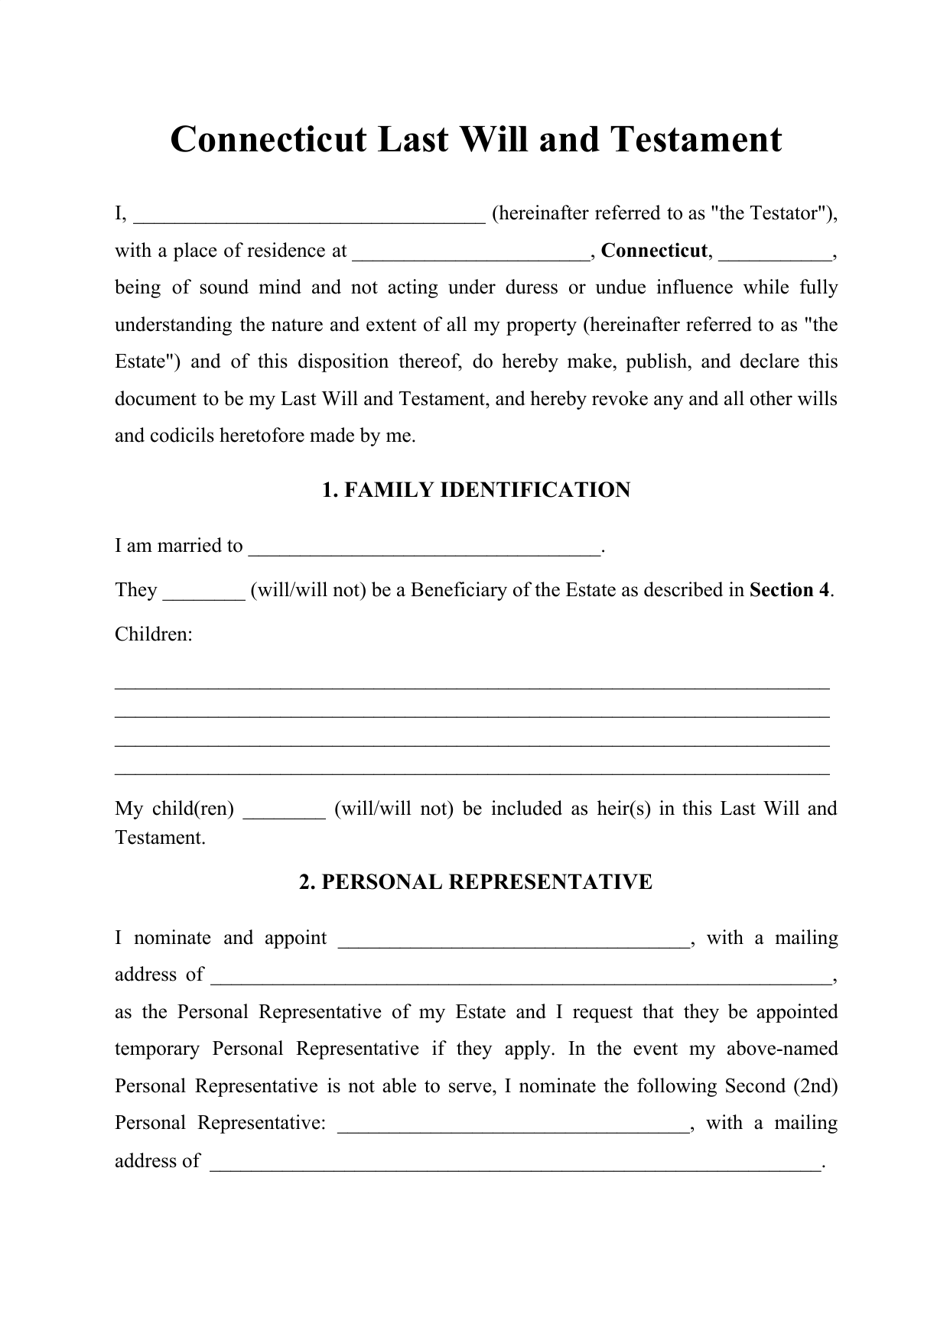 Connecticut Last Will and Testament Template Download Printable PDF